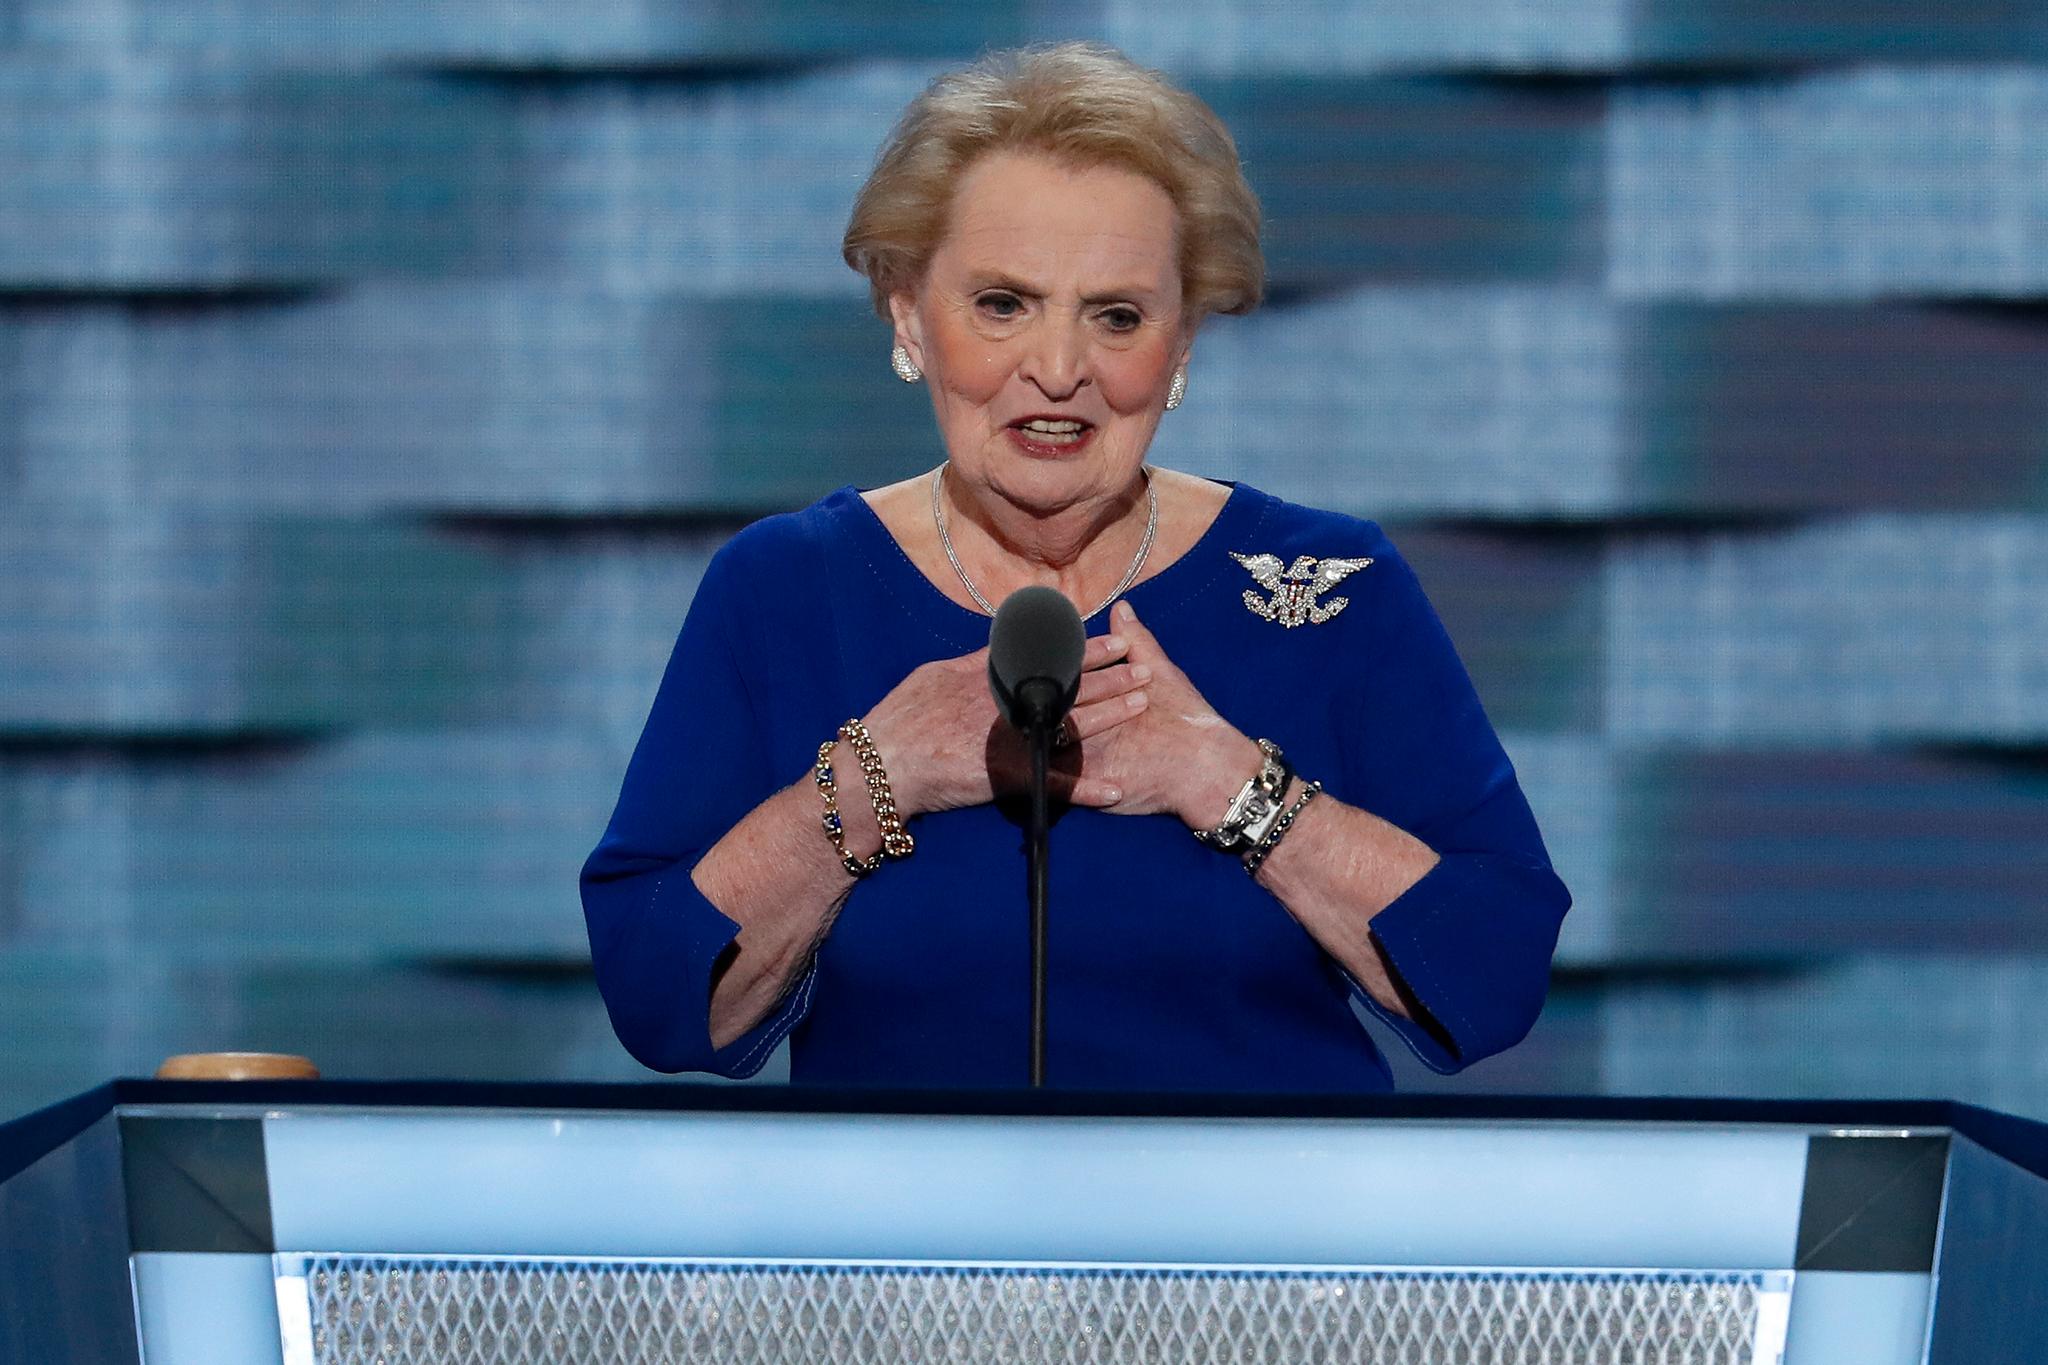 Former United States Secretary of State Madeleine Albright has died